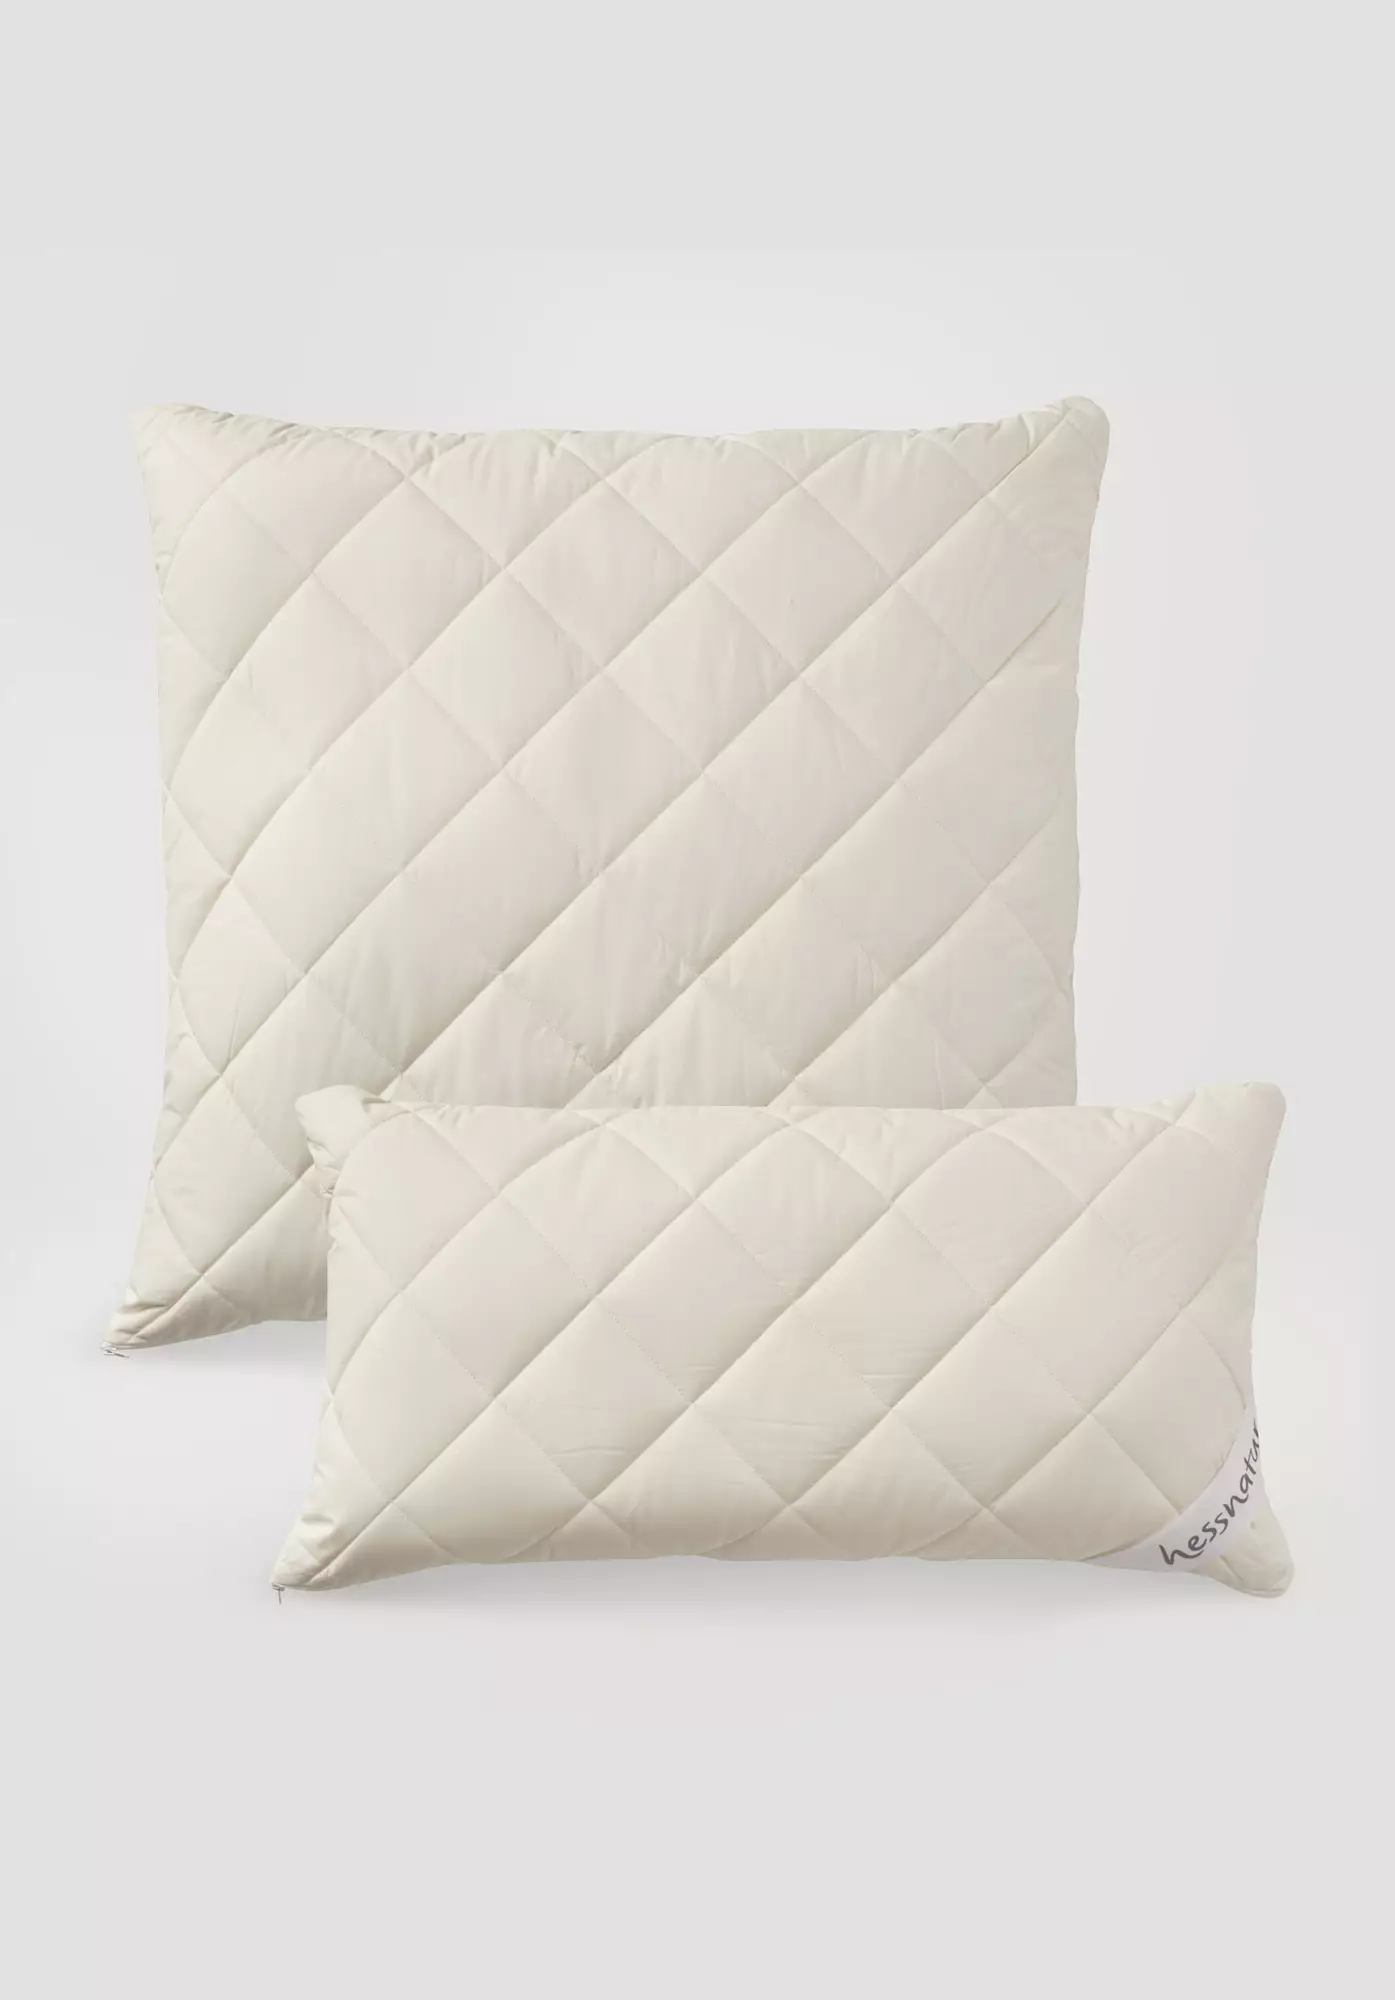 Pillow with organic virgin wool filling - 0